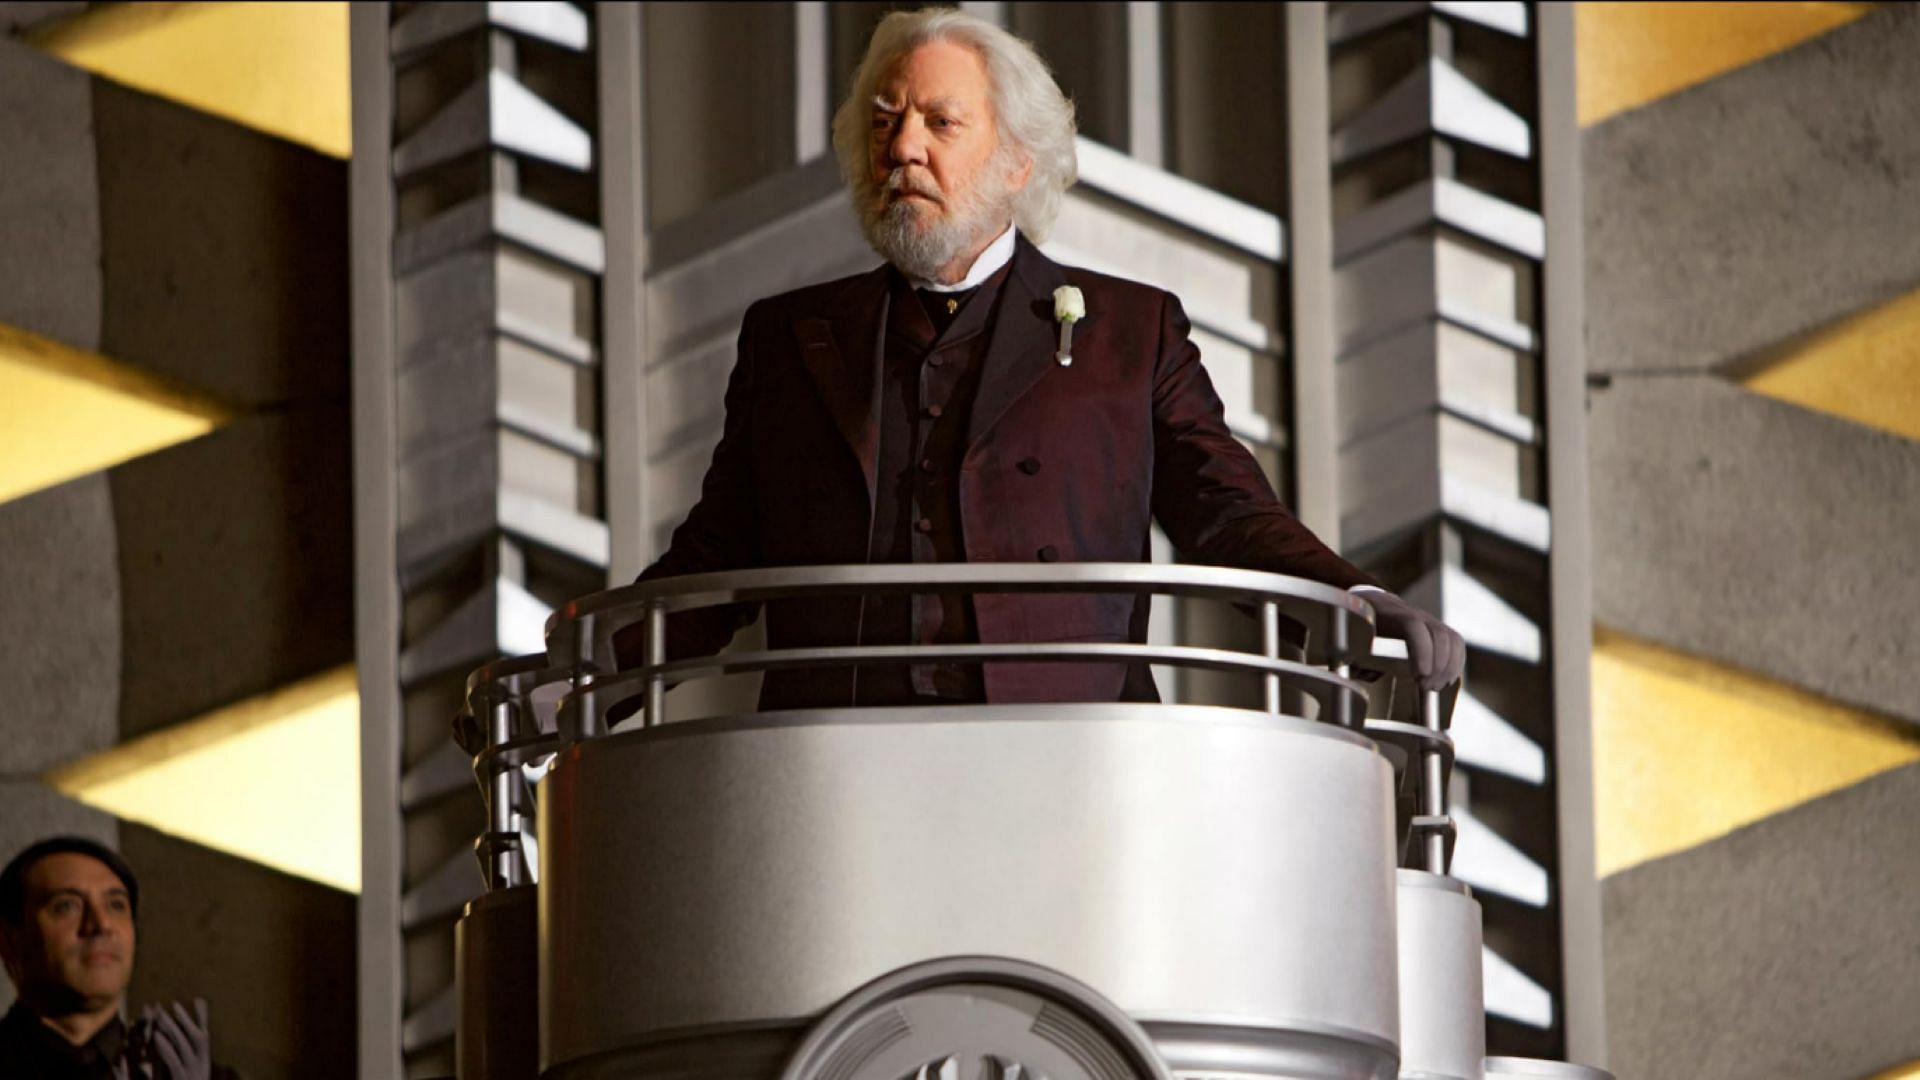 Sutherland as Coriolanus Snow in The Hunger Games (image via Lions Gate Films)